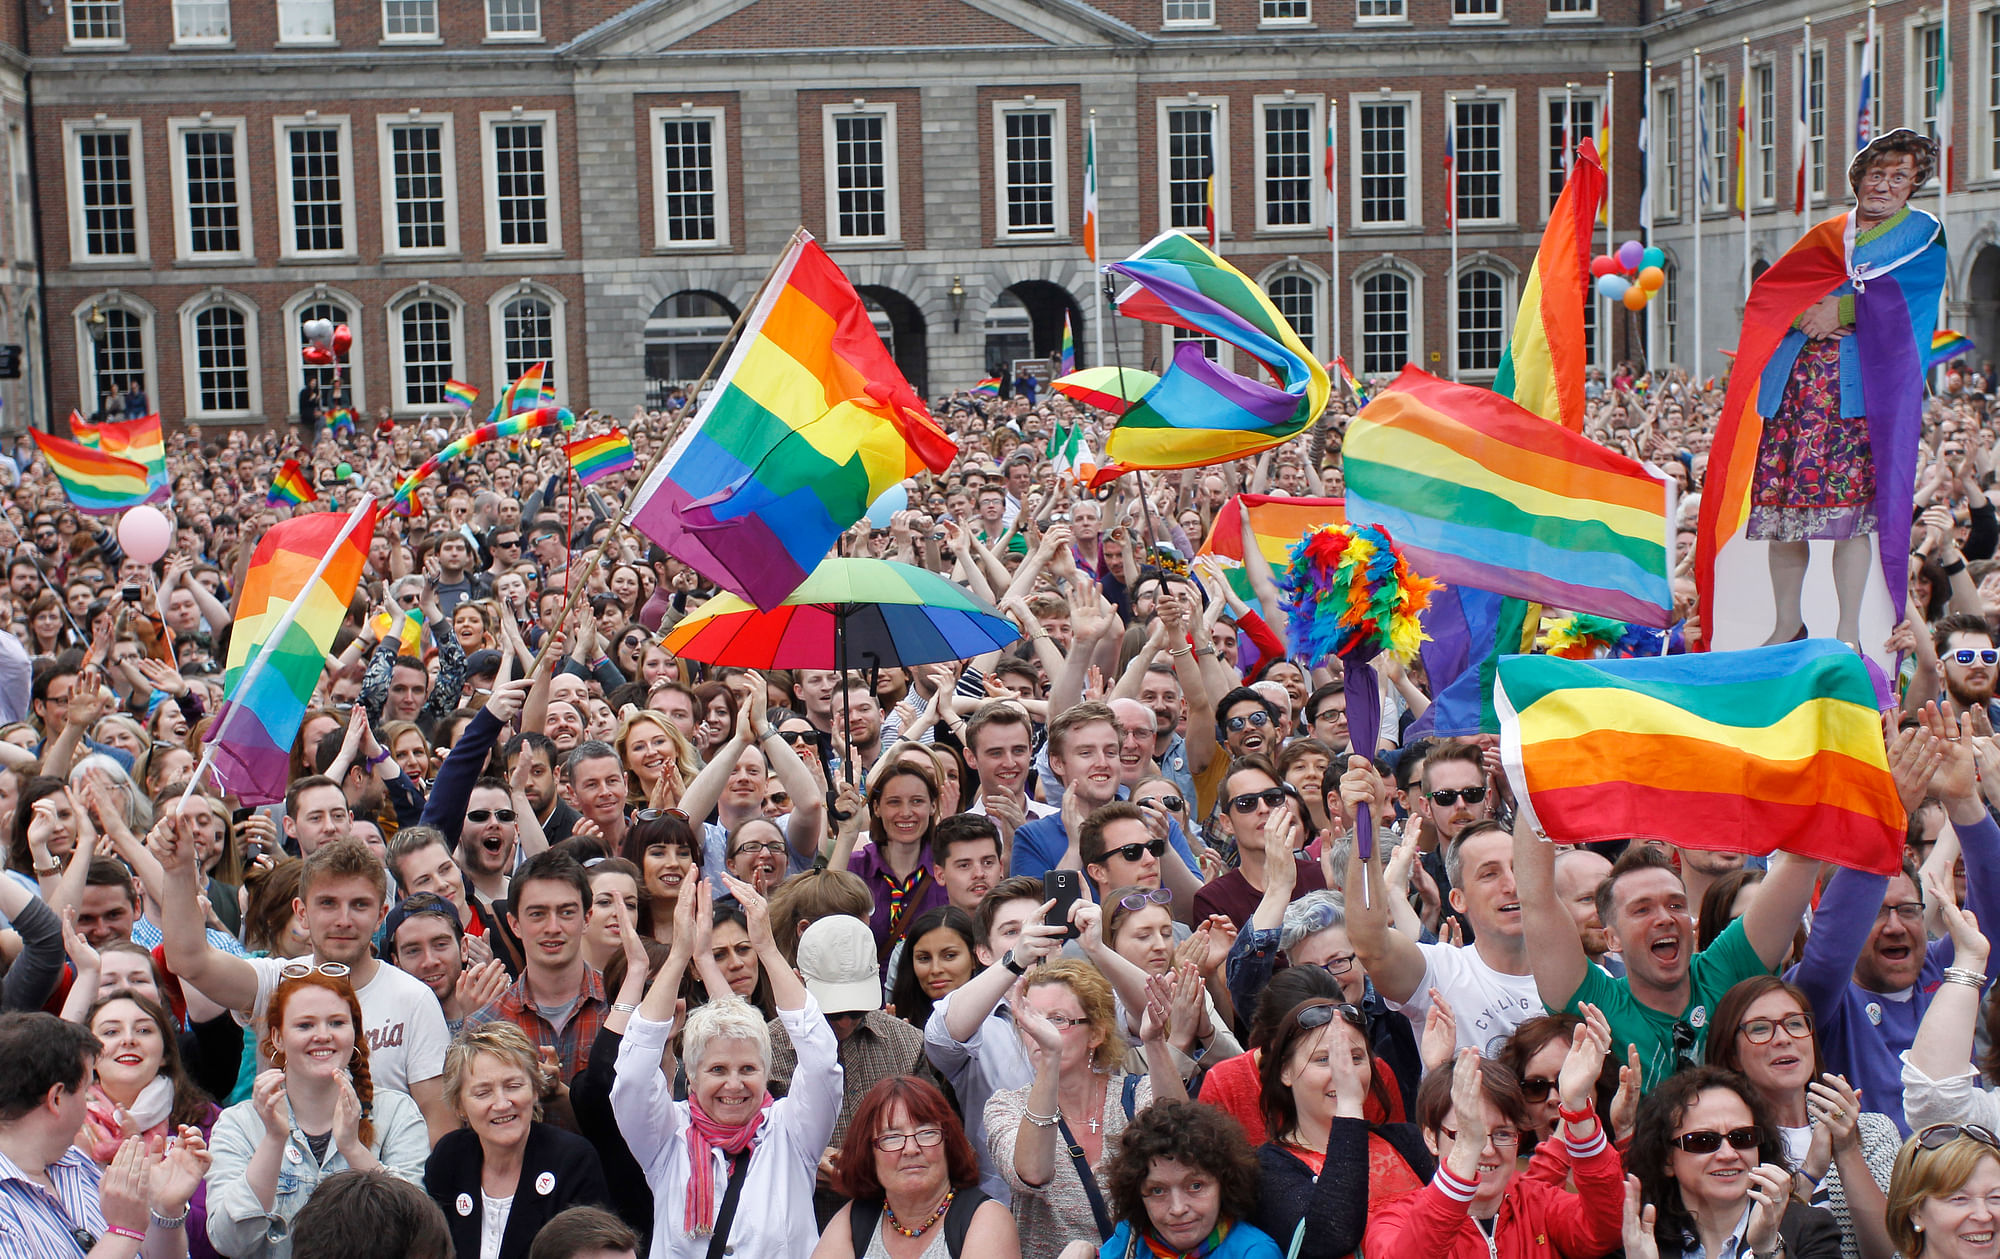 Ireland voted resoundingly to legalize gay marriage in the world’s first national vote on the issue. (Photo:AP)